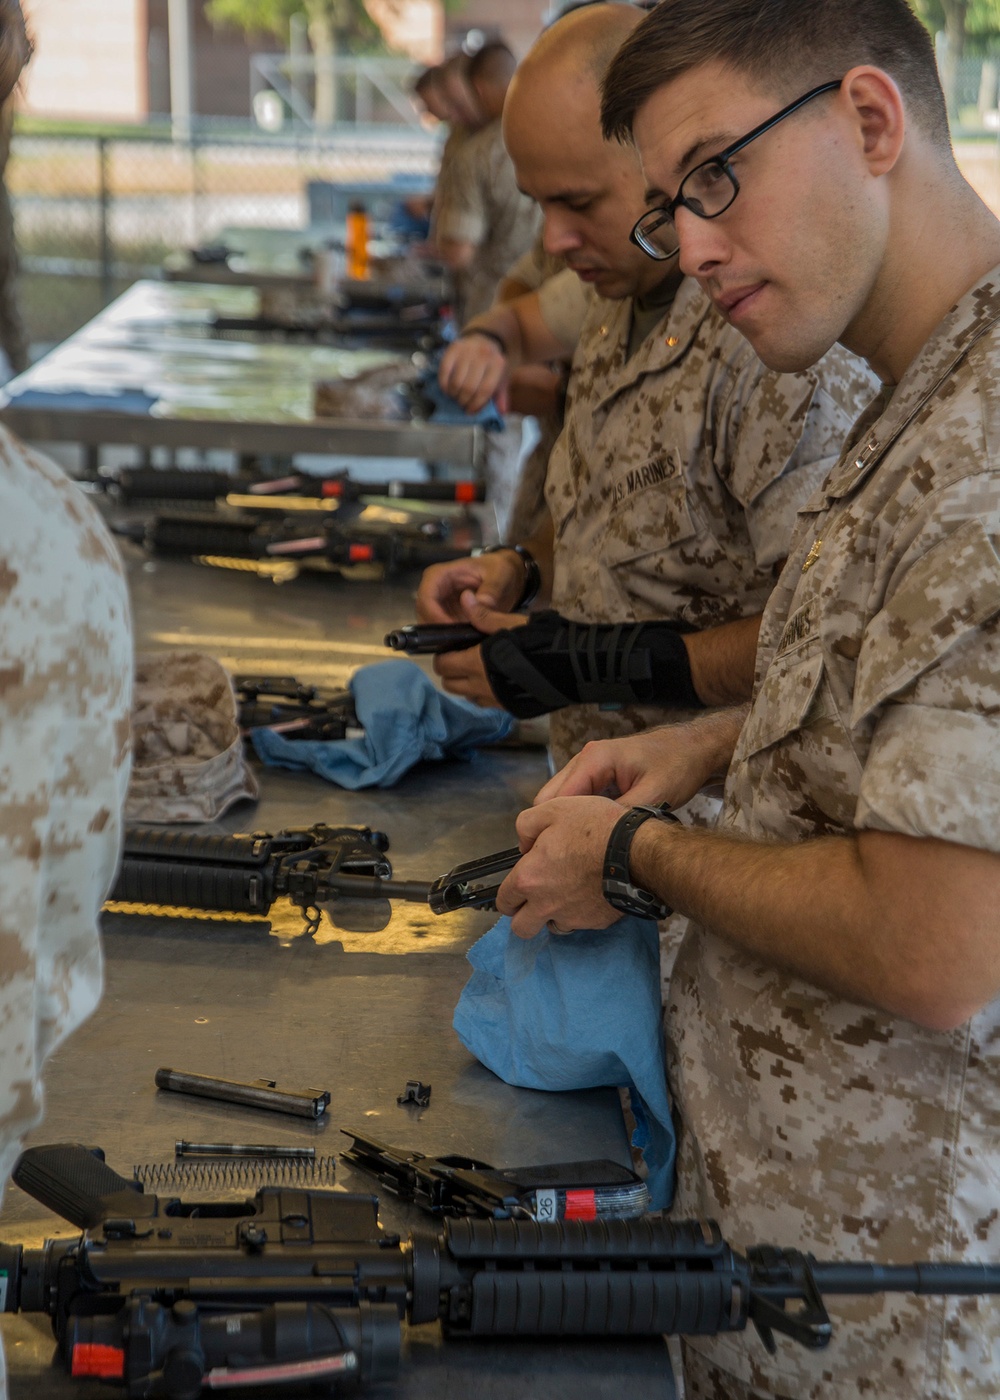 22nd MEU conducts muster exercise to prep for DSCA role